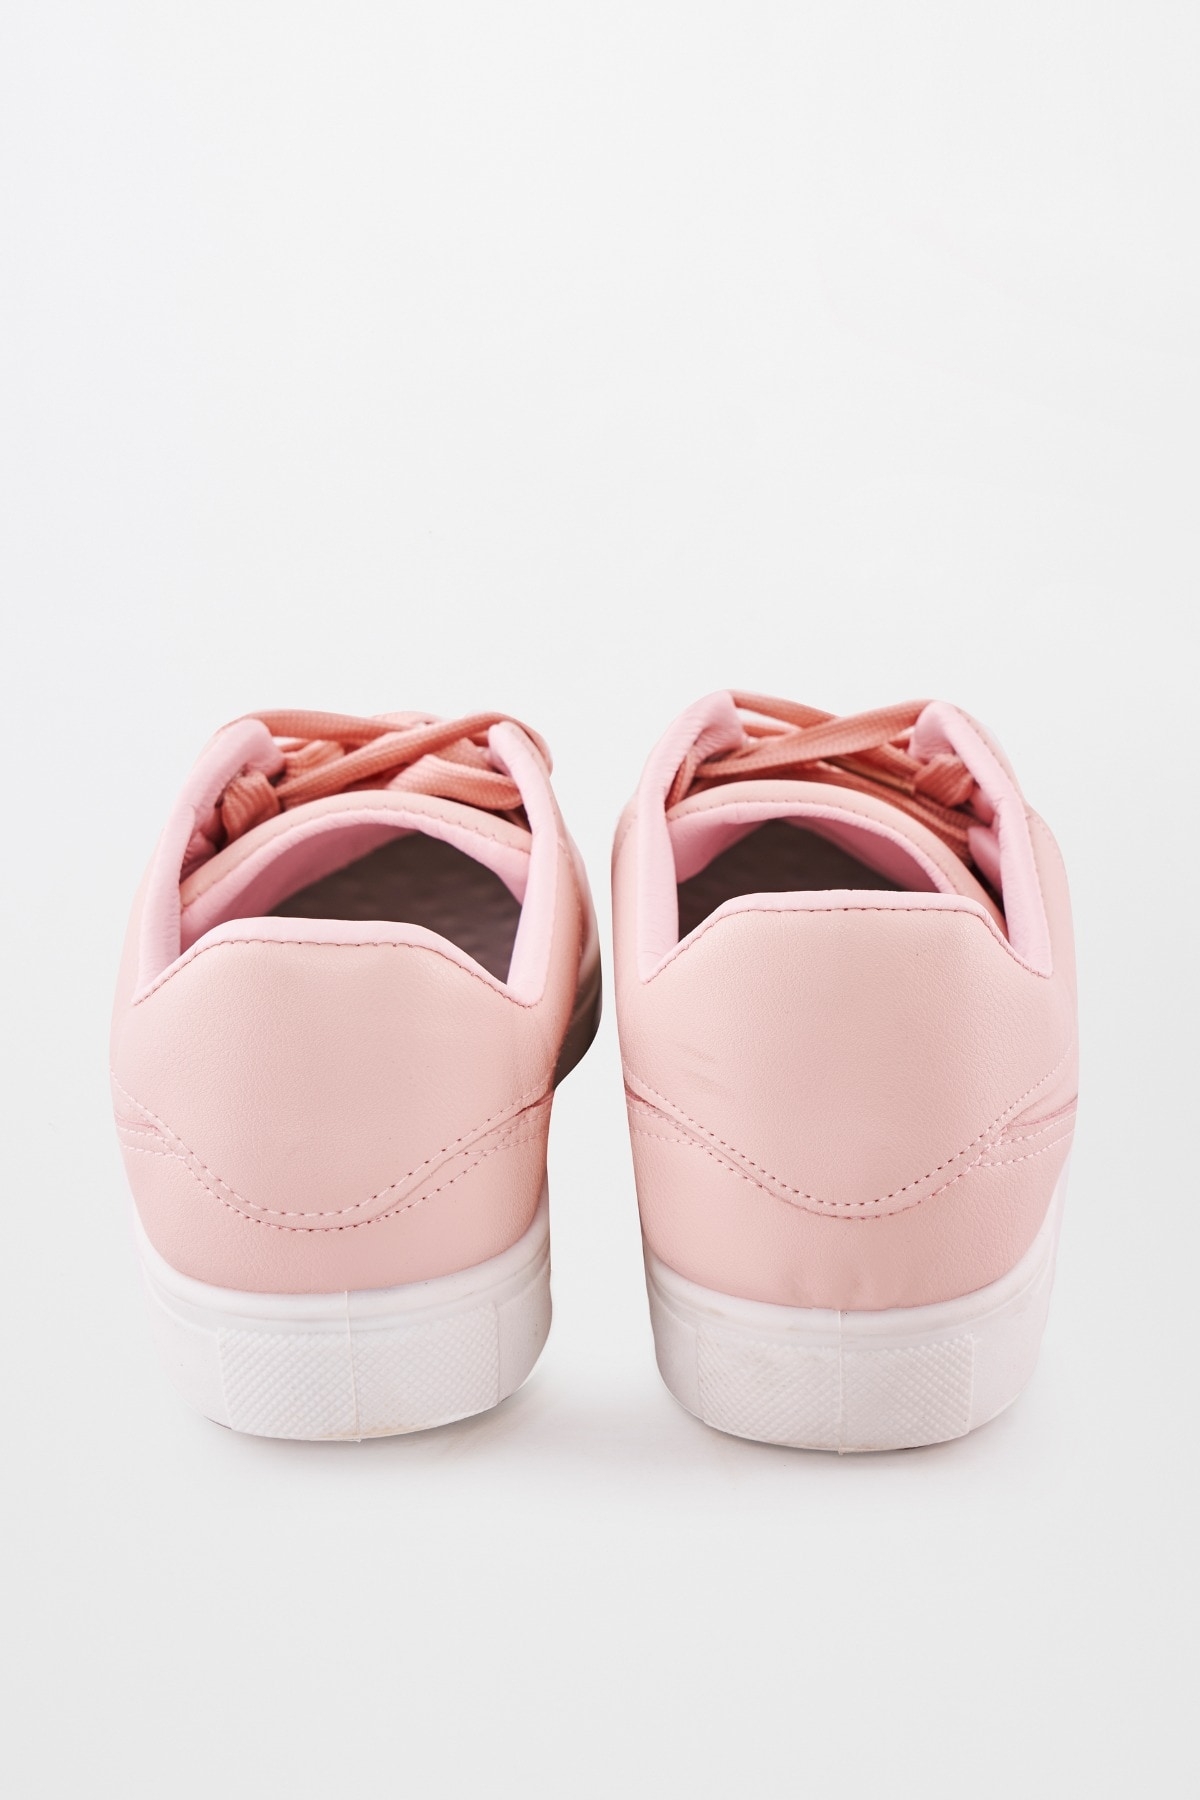 AND | Pink Sneakers 1